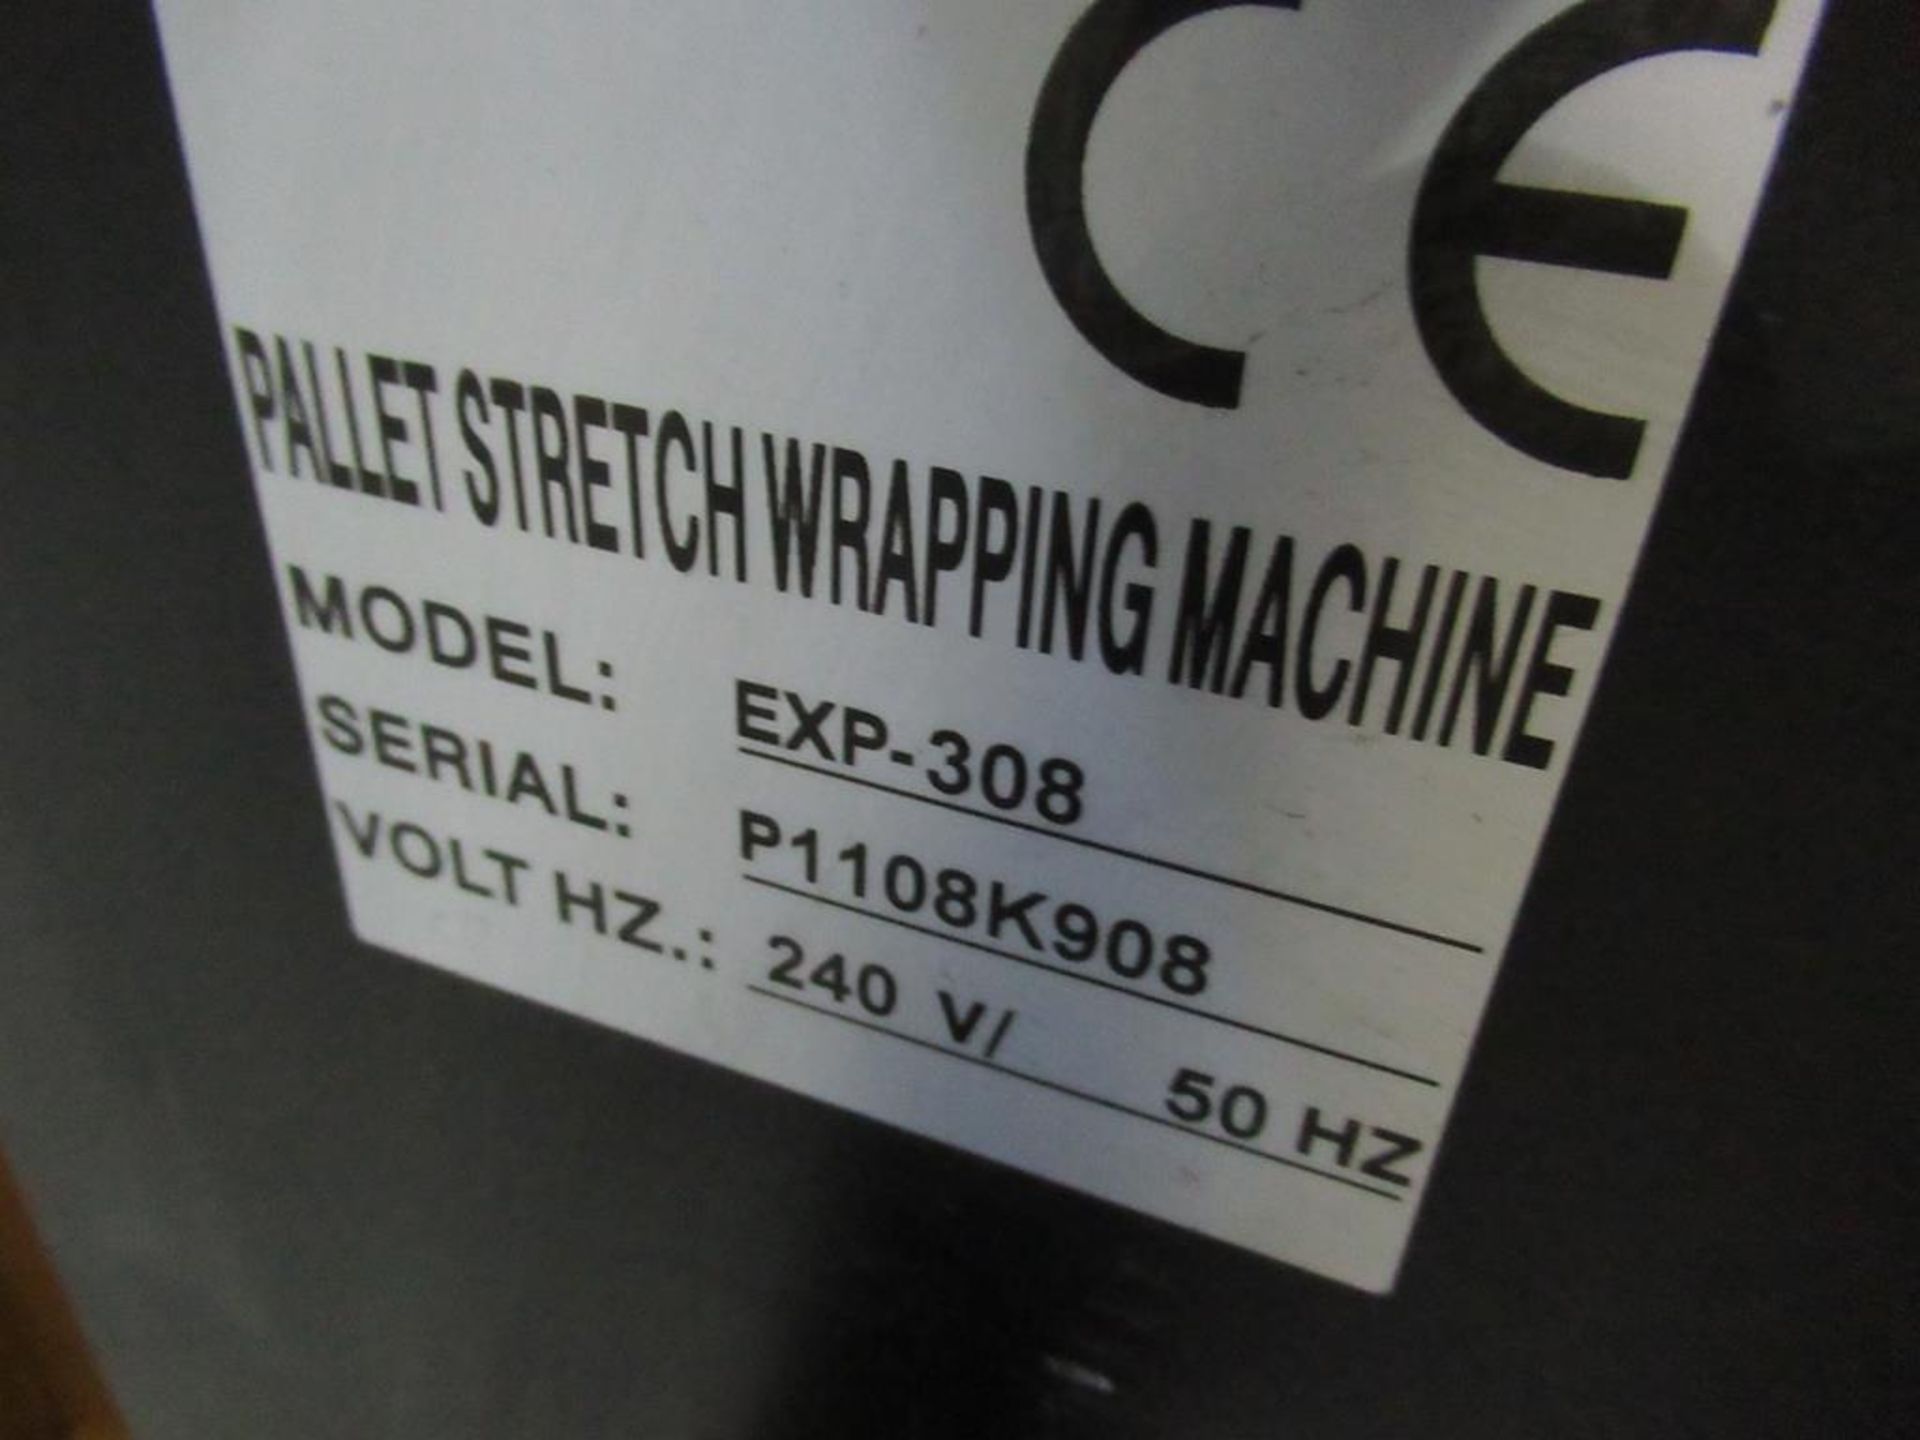 Pallet wrapping machine. - Image 6 of 10